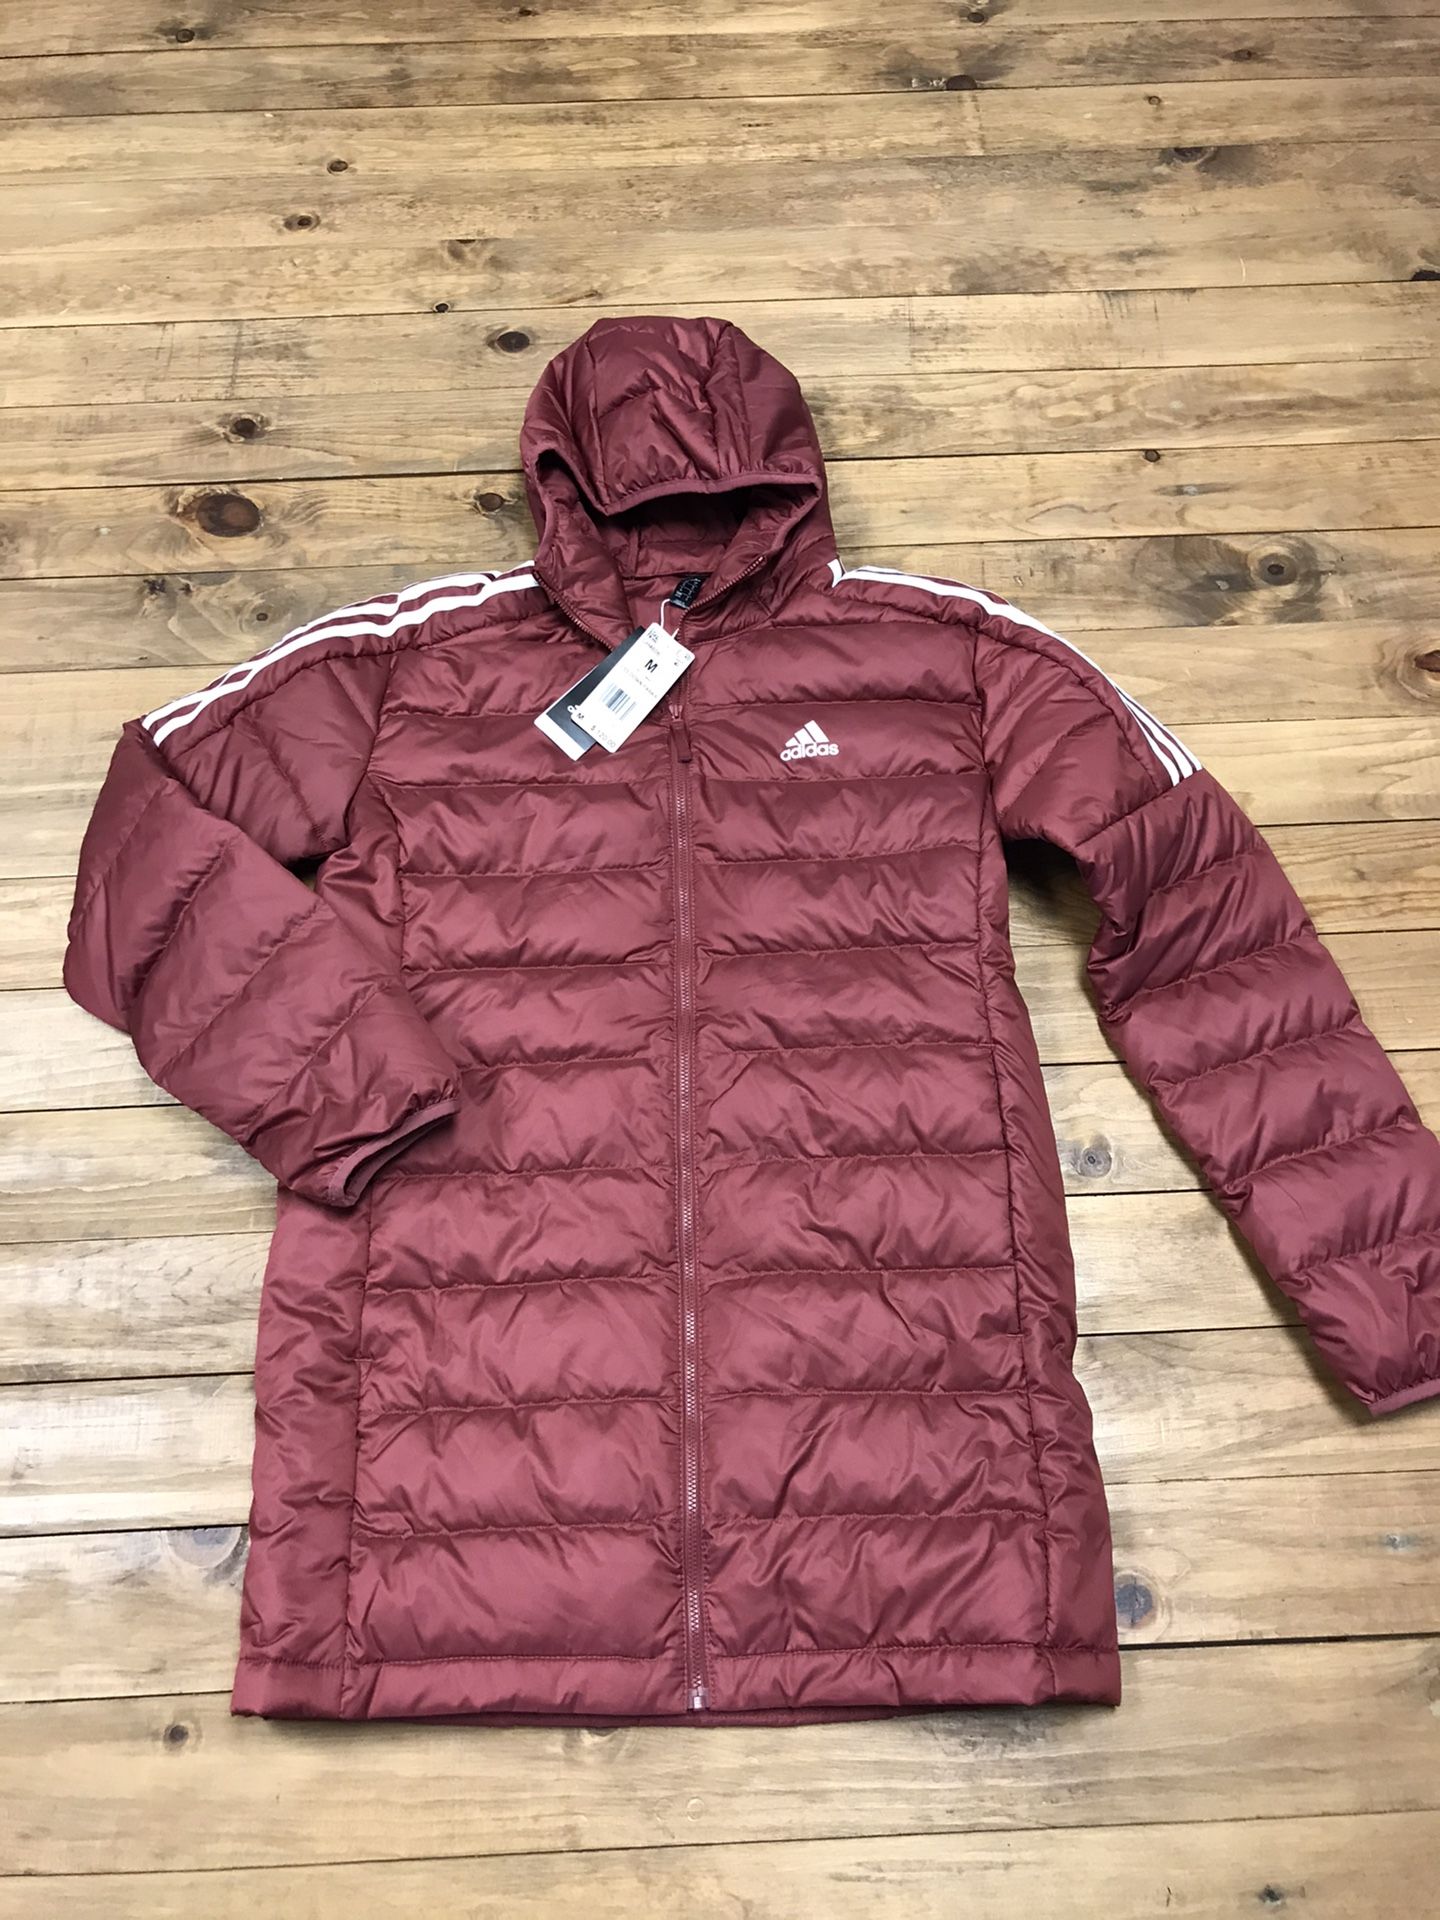 Men's Adidas Essentials Down Hooded Parka Jacket Red Winter GH4606 Size M New With Tags